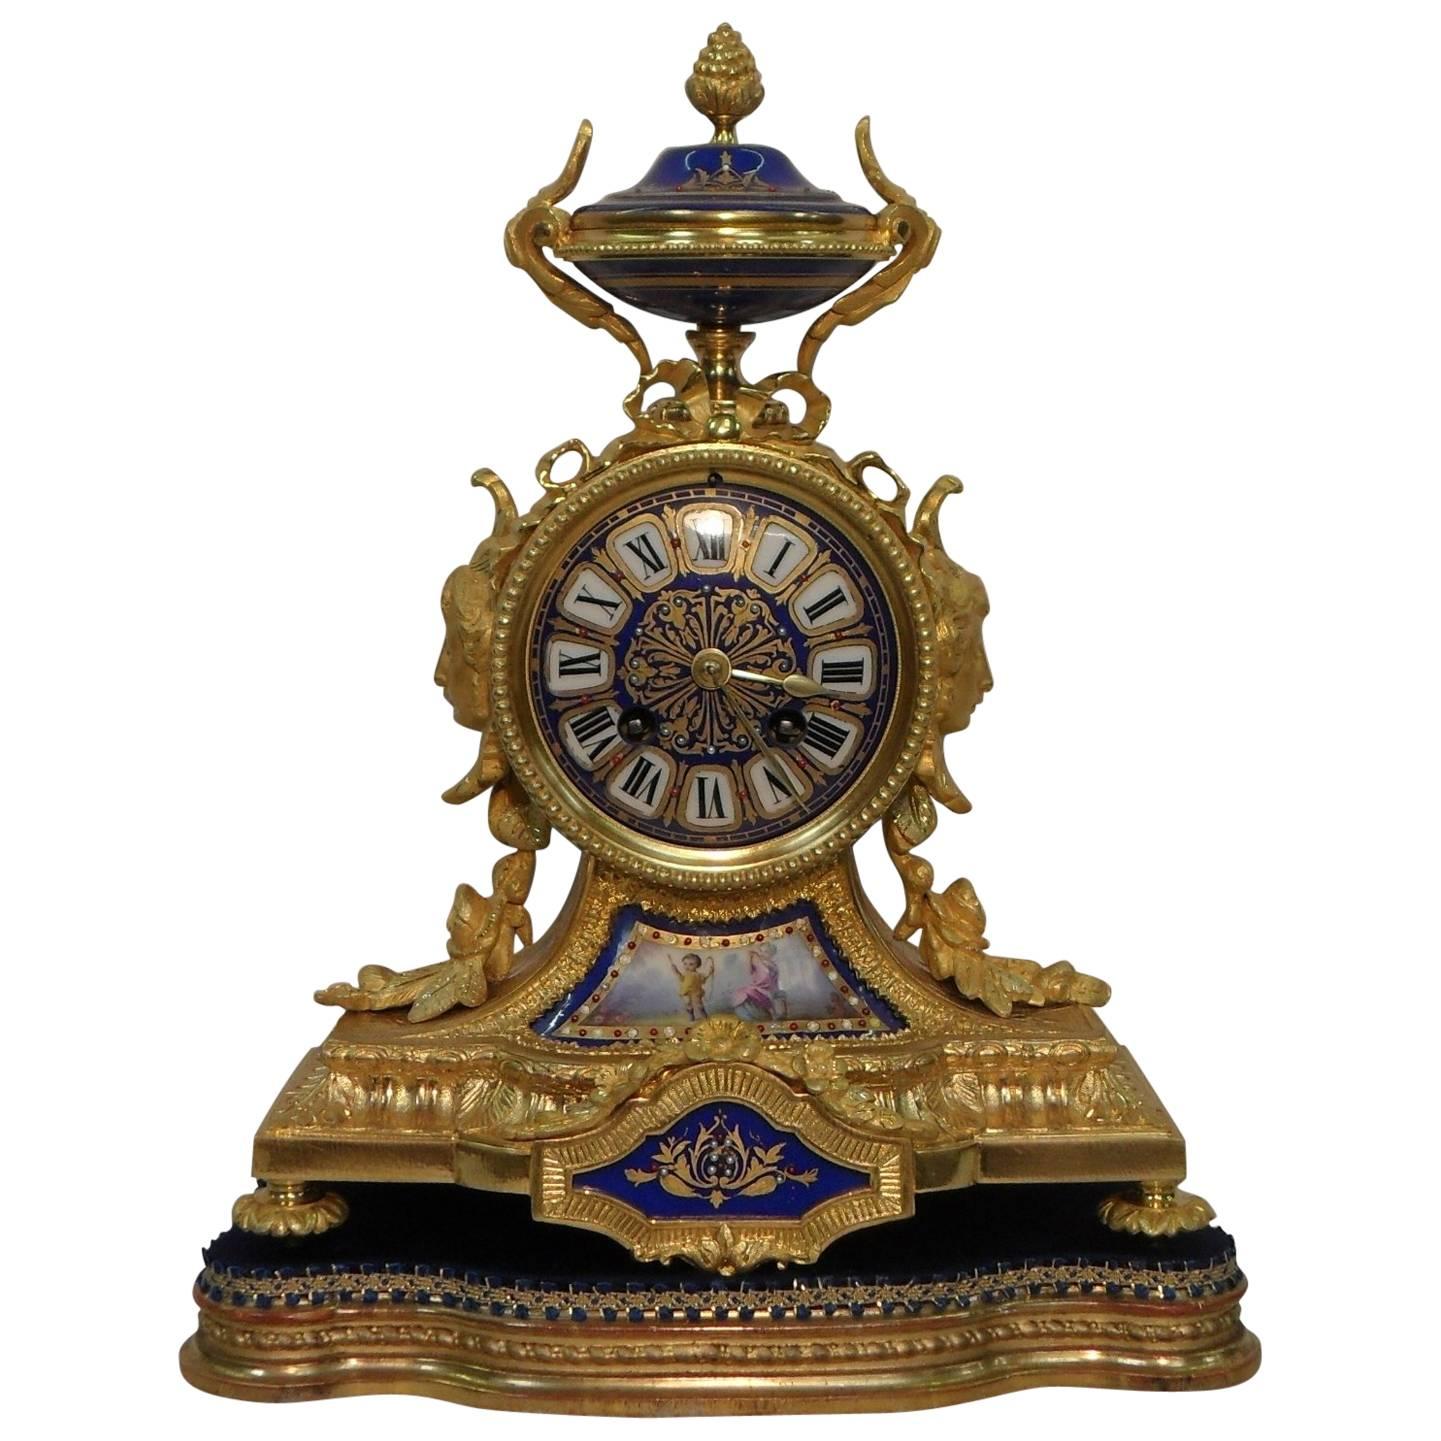 French 19th Century Bronze Gilt Mantel Clock with Serve Style Panels